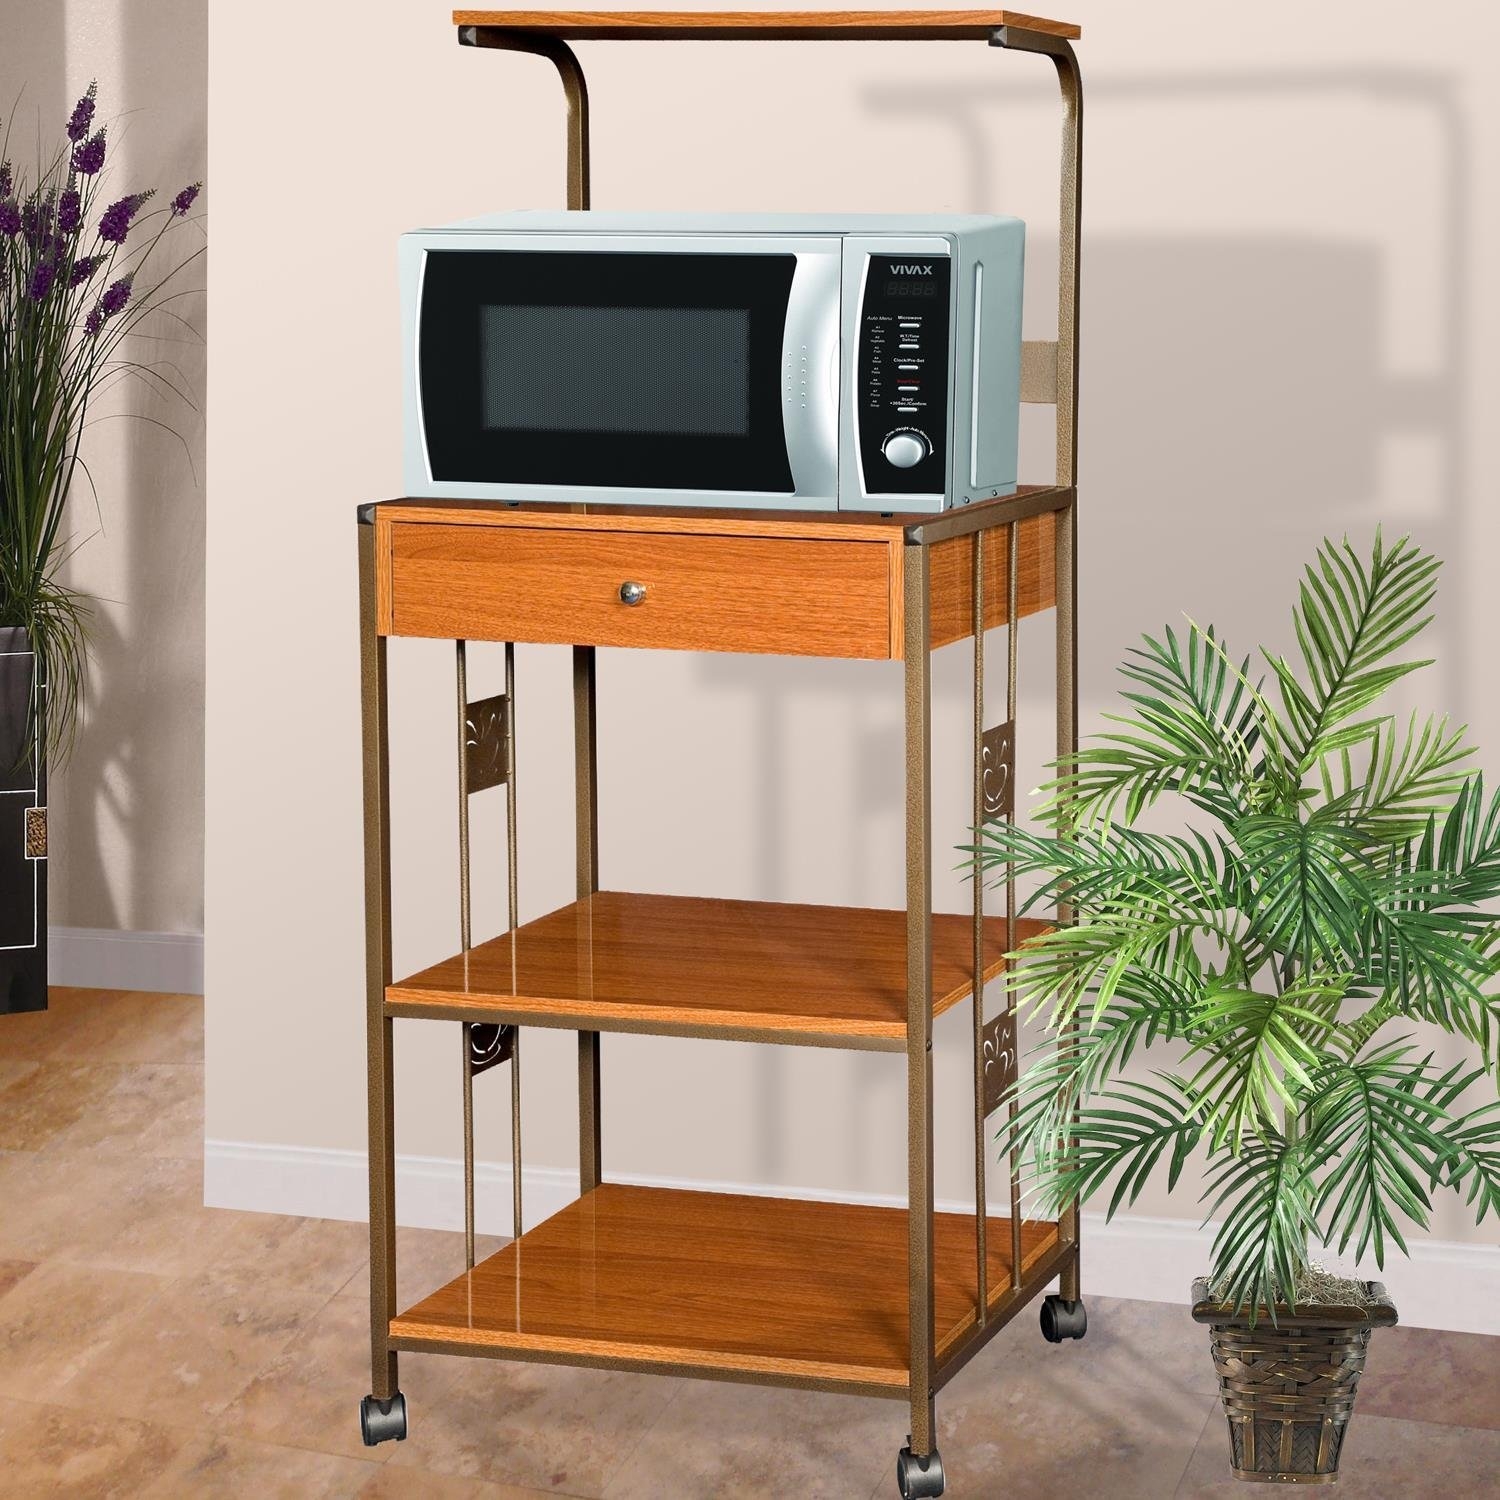 Home Source Industries R0018 Cherry Microwave Cart With 2 Electrical Outlets Drawer And 2 Shelves Cherry Finish 